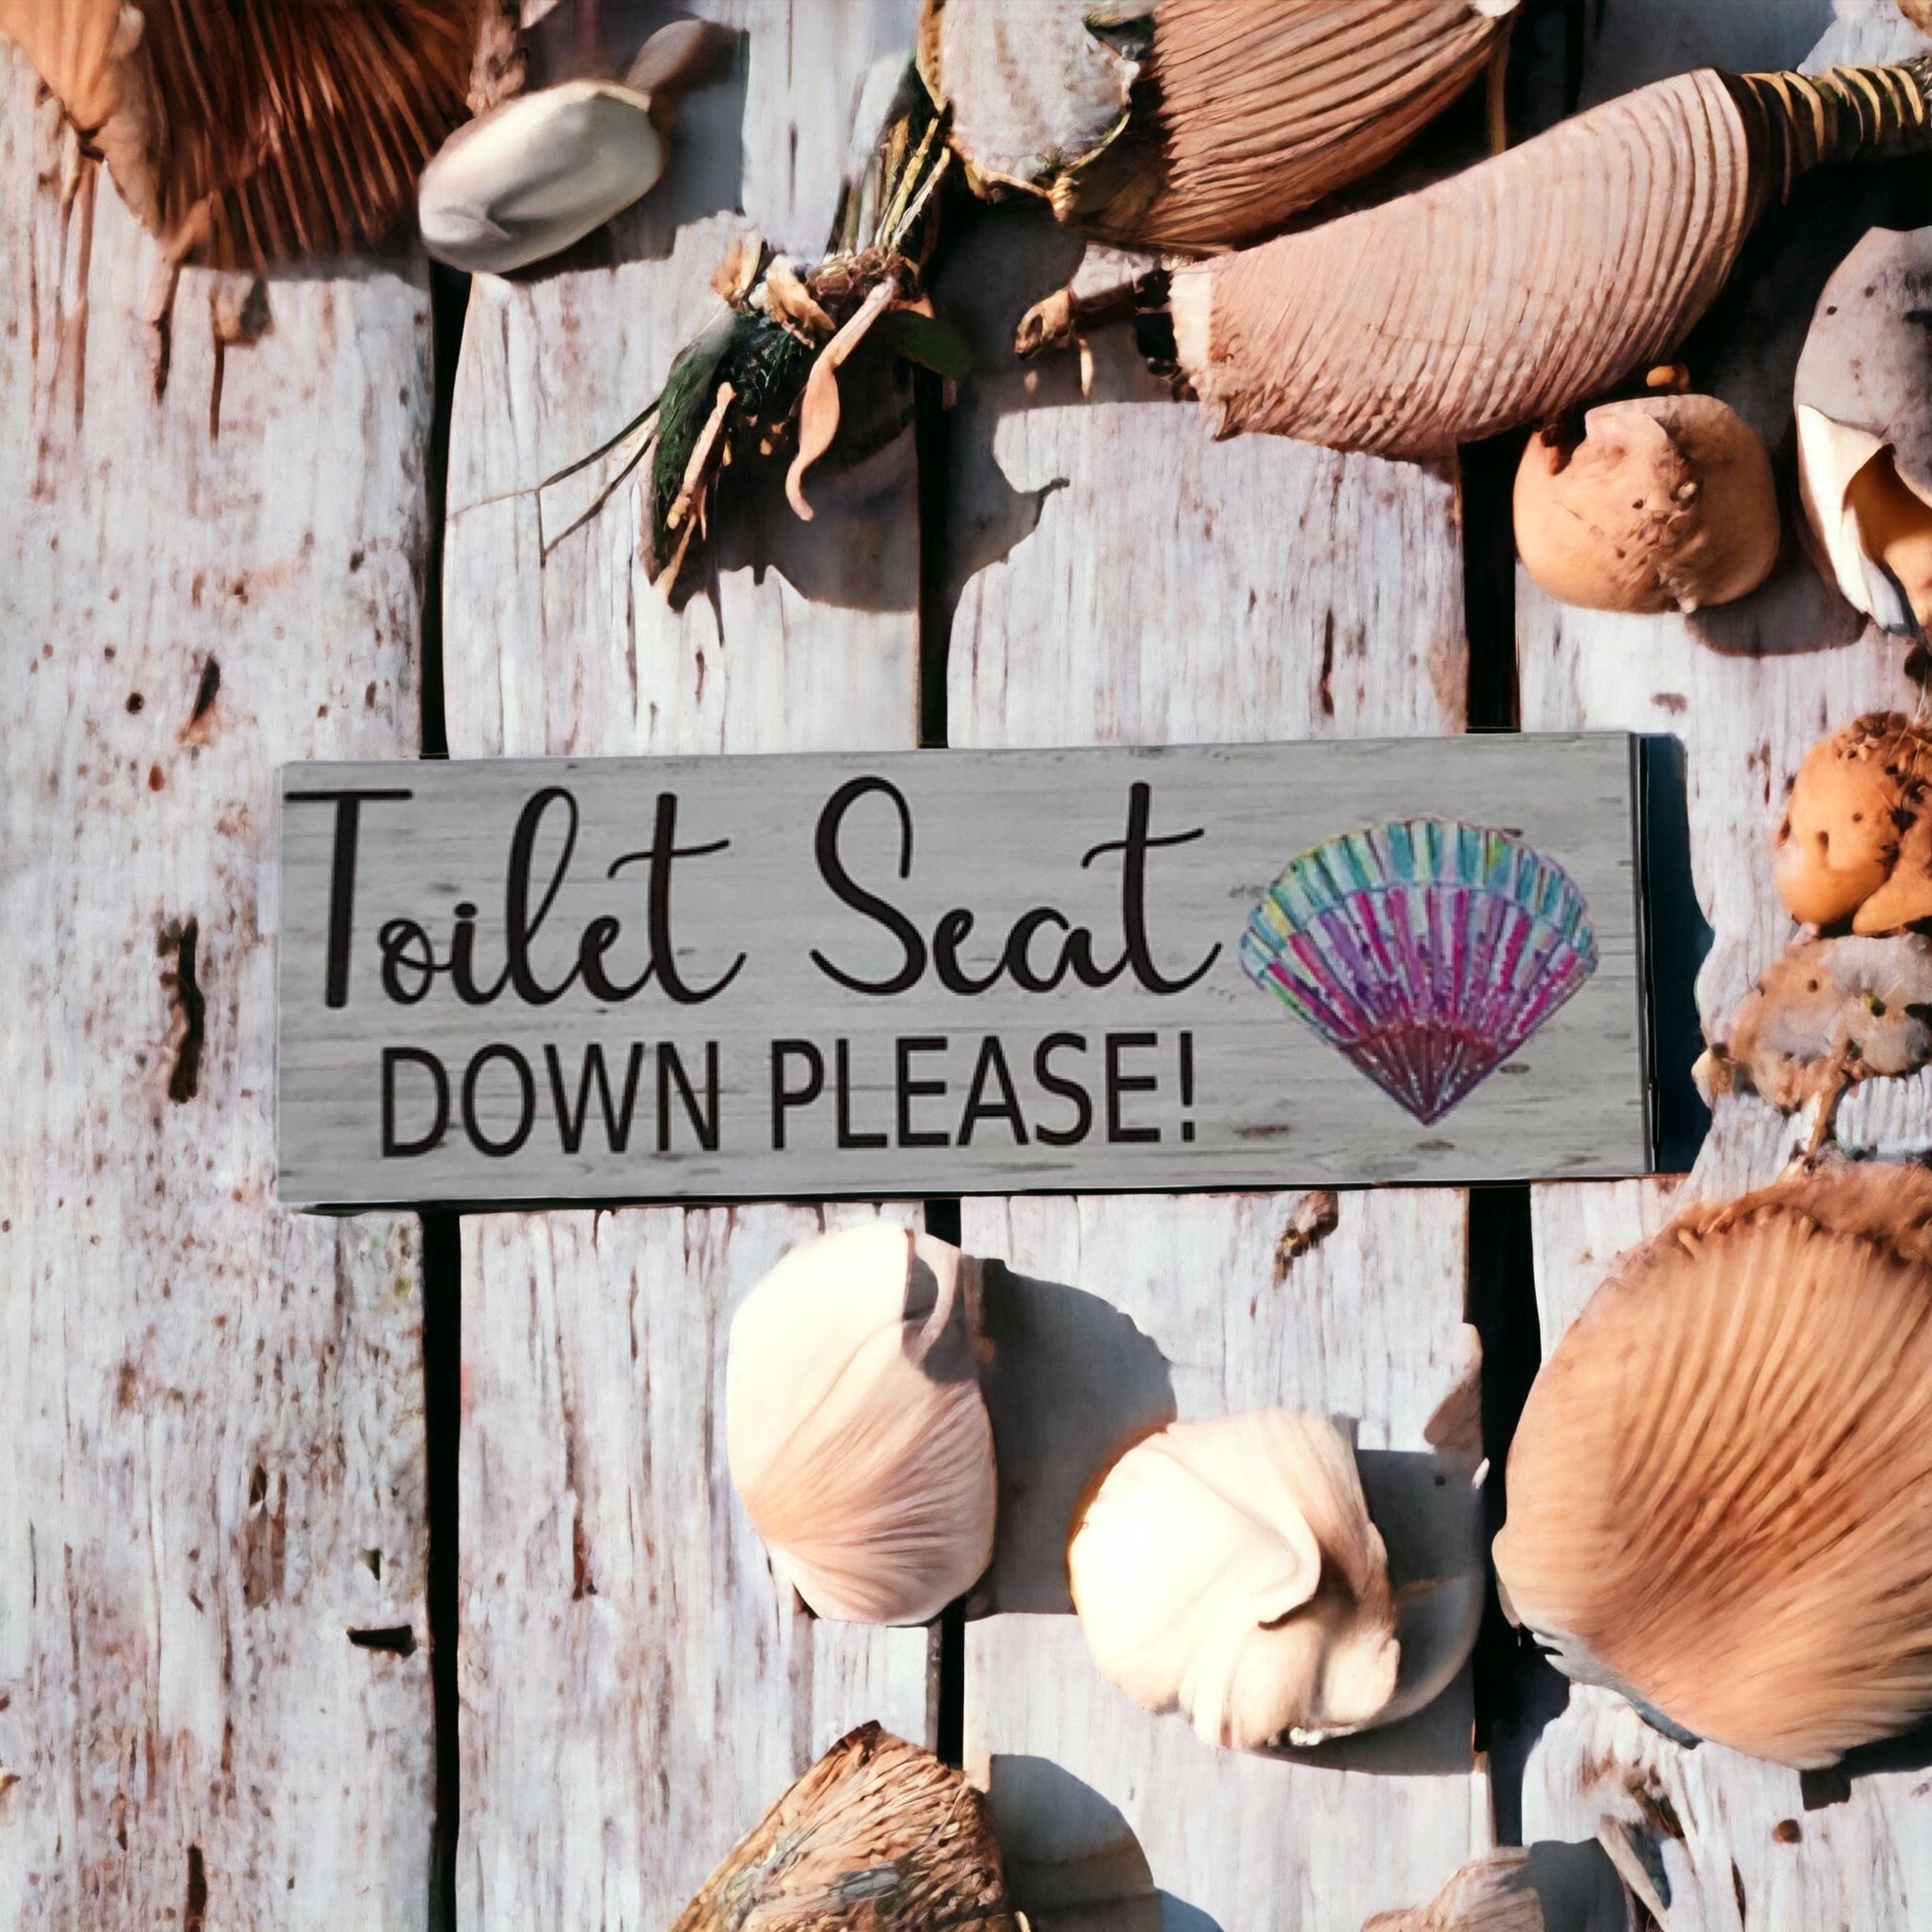 Toilet Seat Down Please Shell Sign - The Renmy Store Homewares & Gifts 